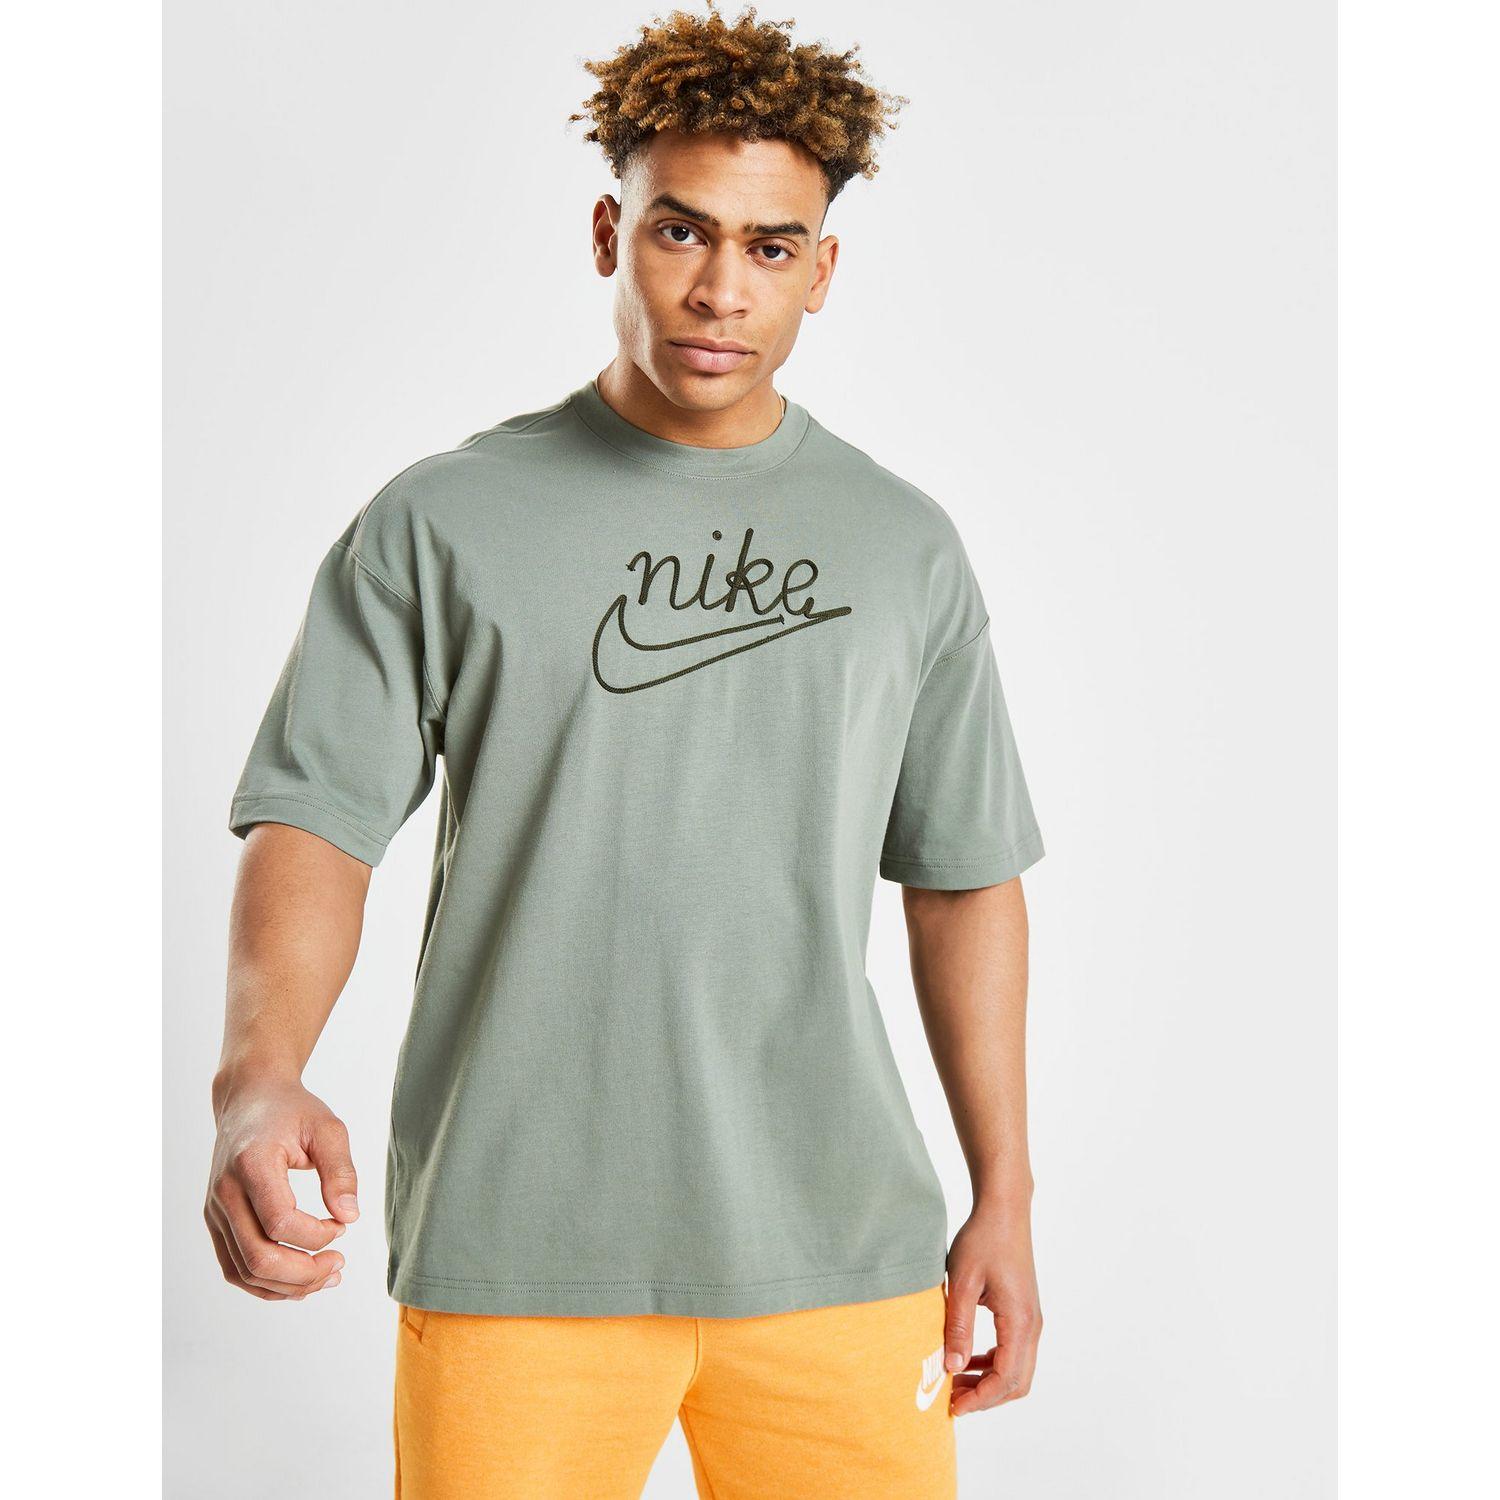 Nike Cotton Outline T-shirt in Green for Men - Lyst